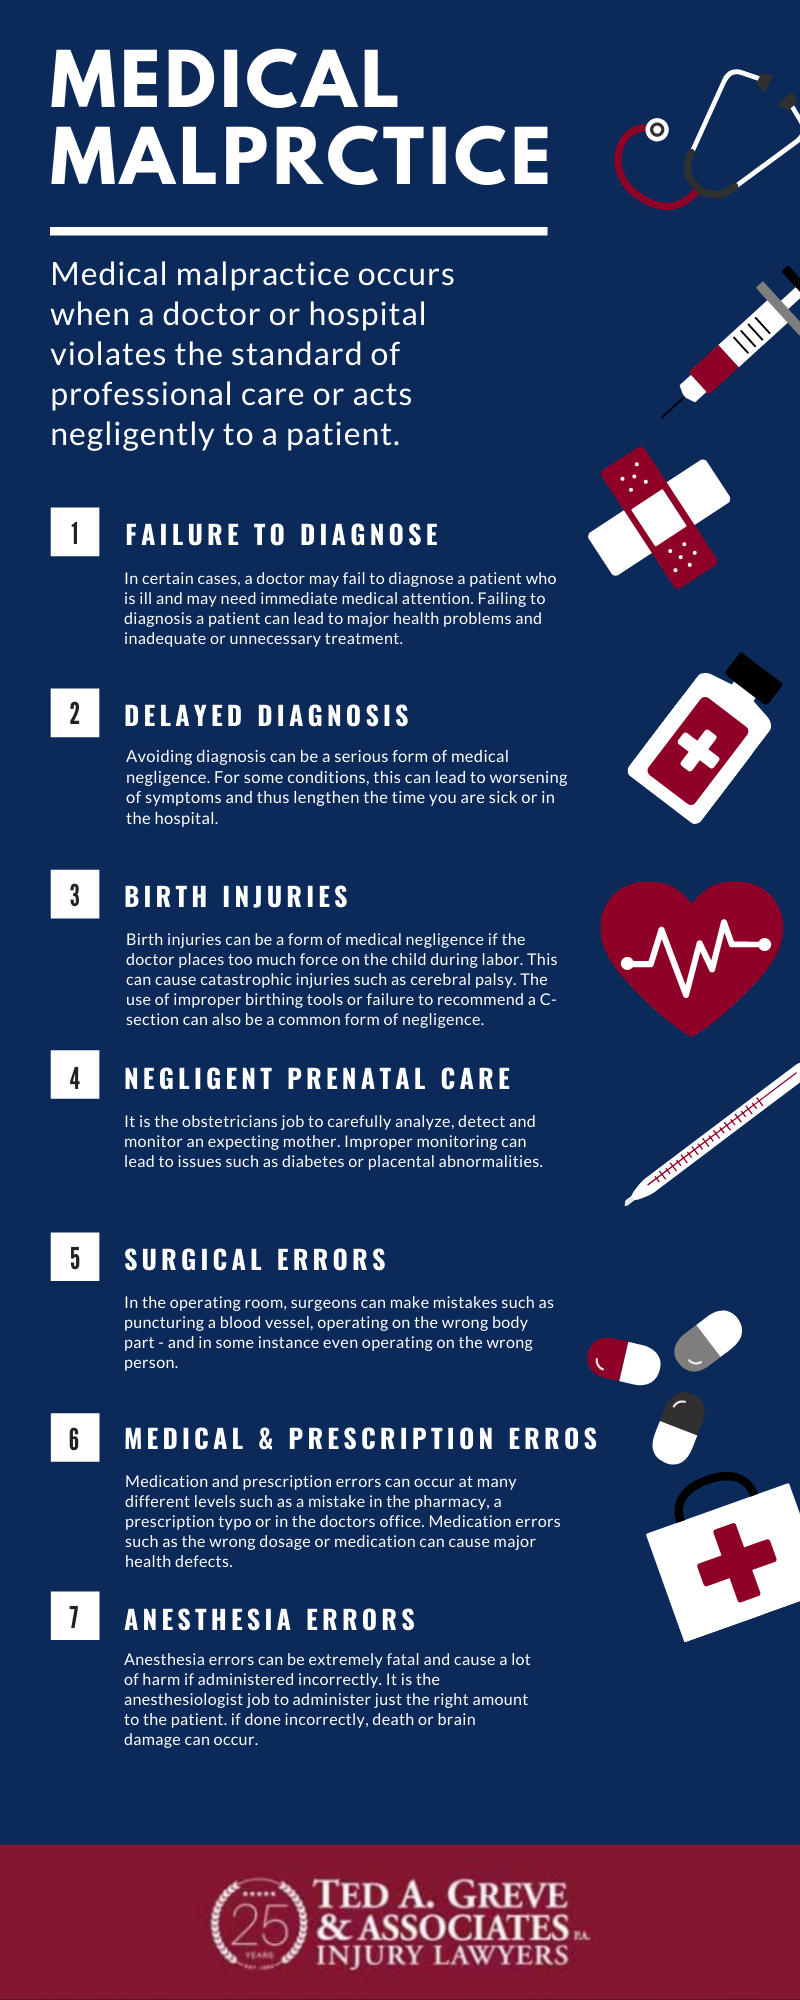 Ted Greve Charlotte Medical Malpractice Infographic